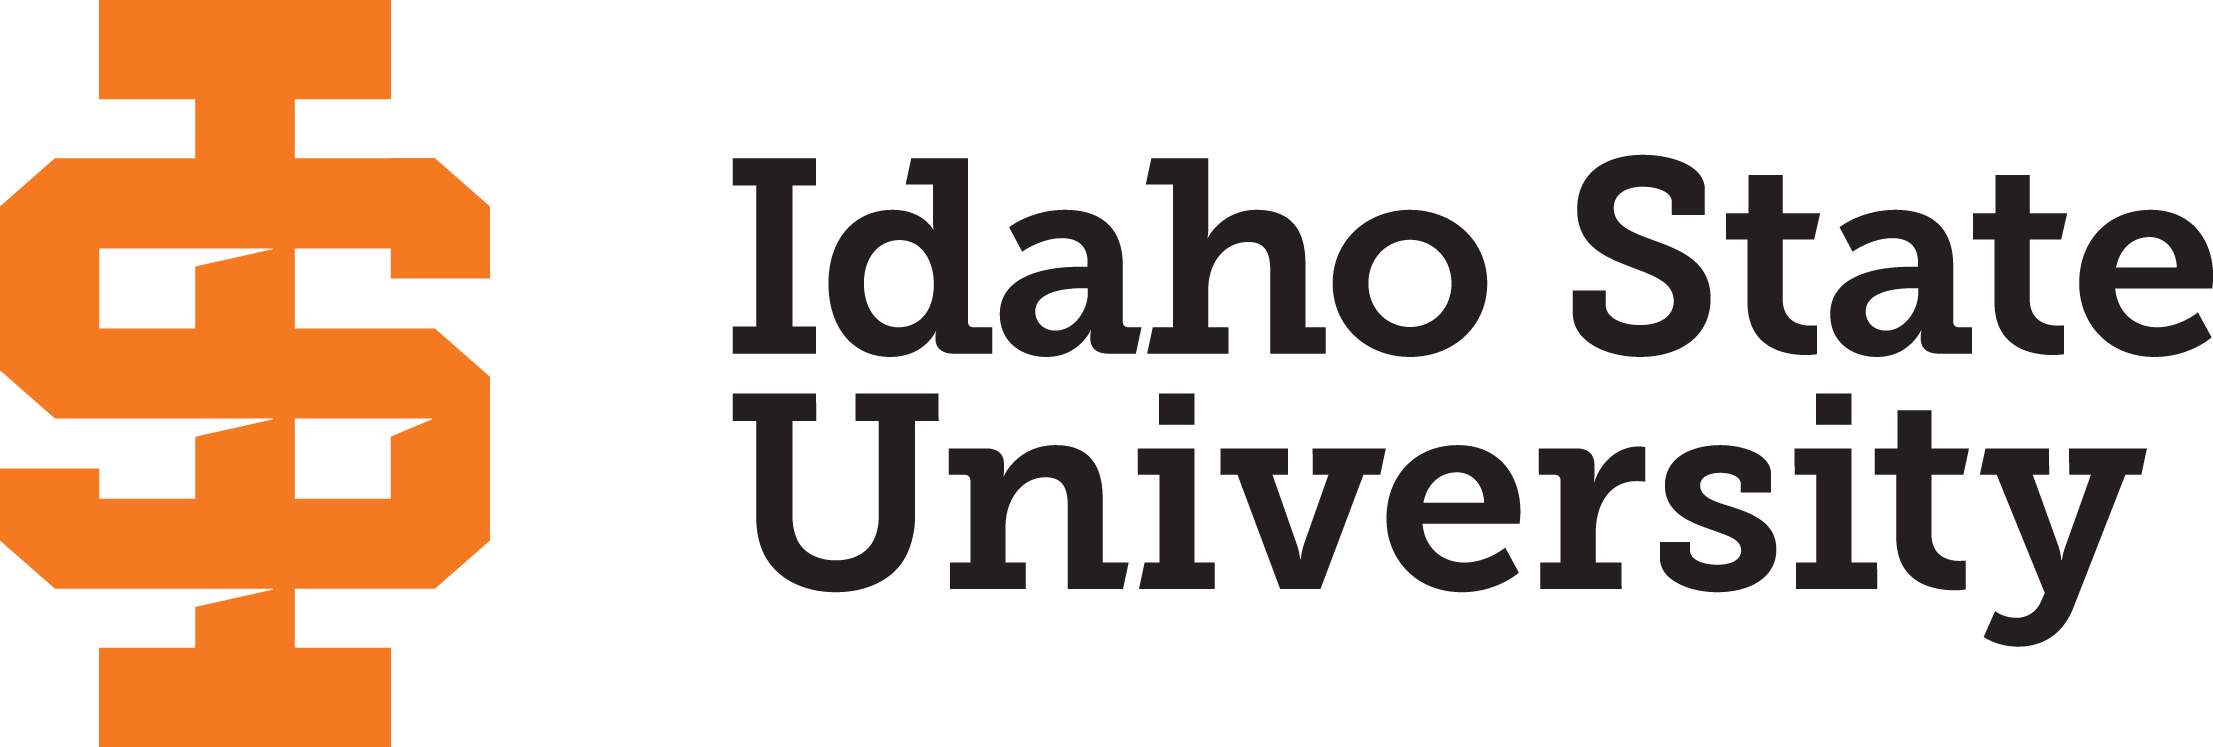 Idaho State University, Office for Research